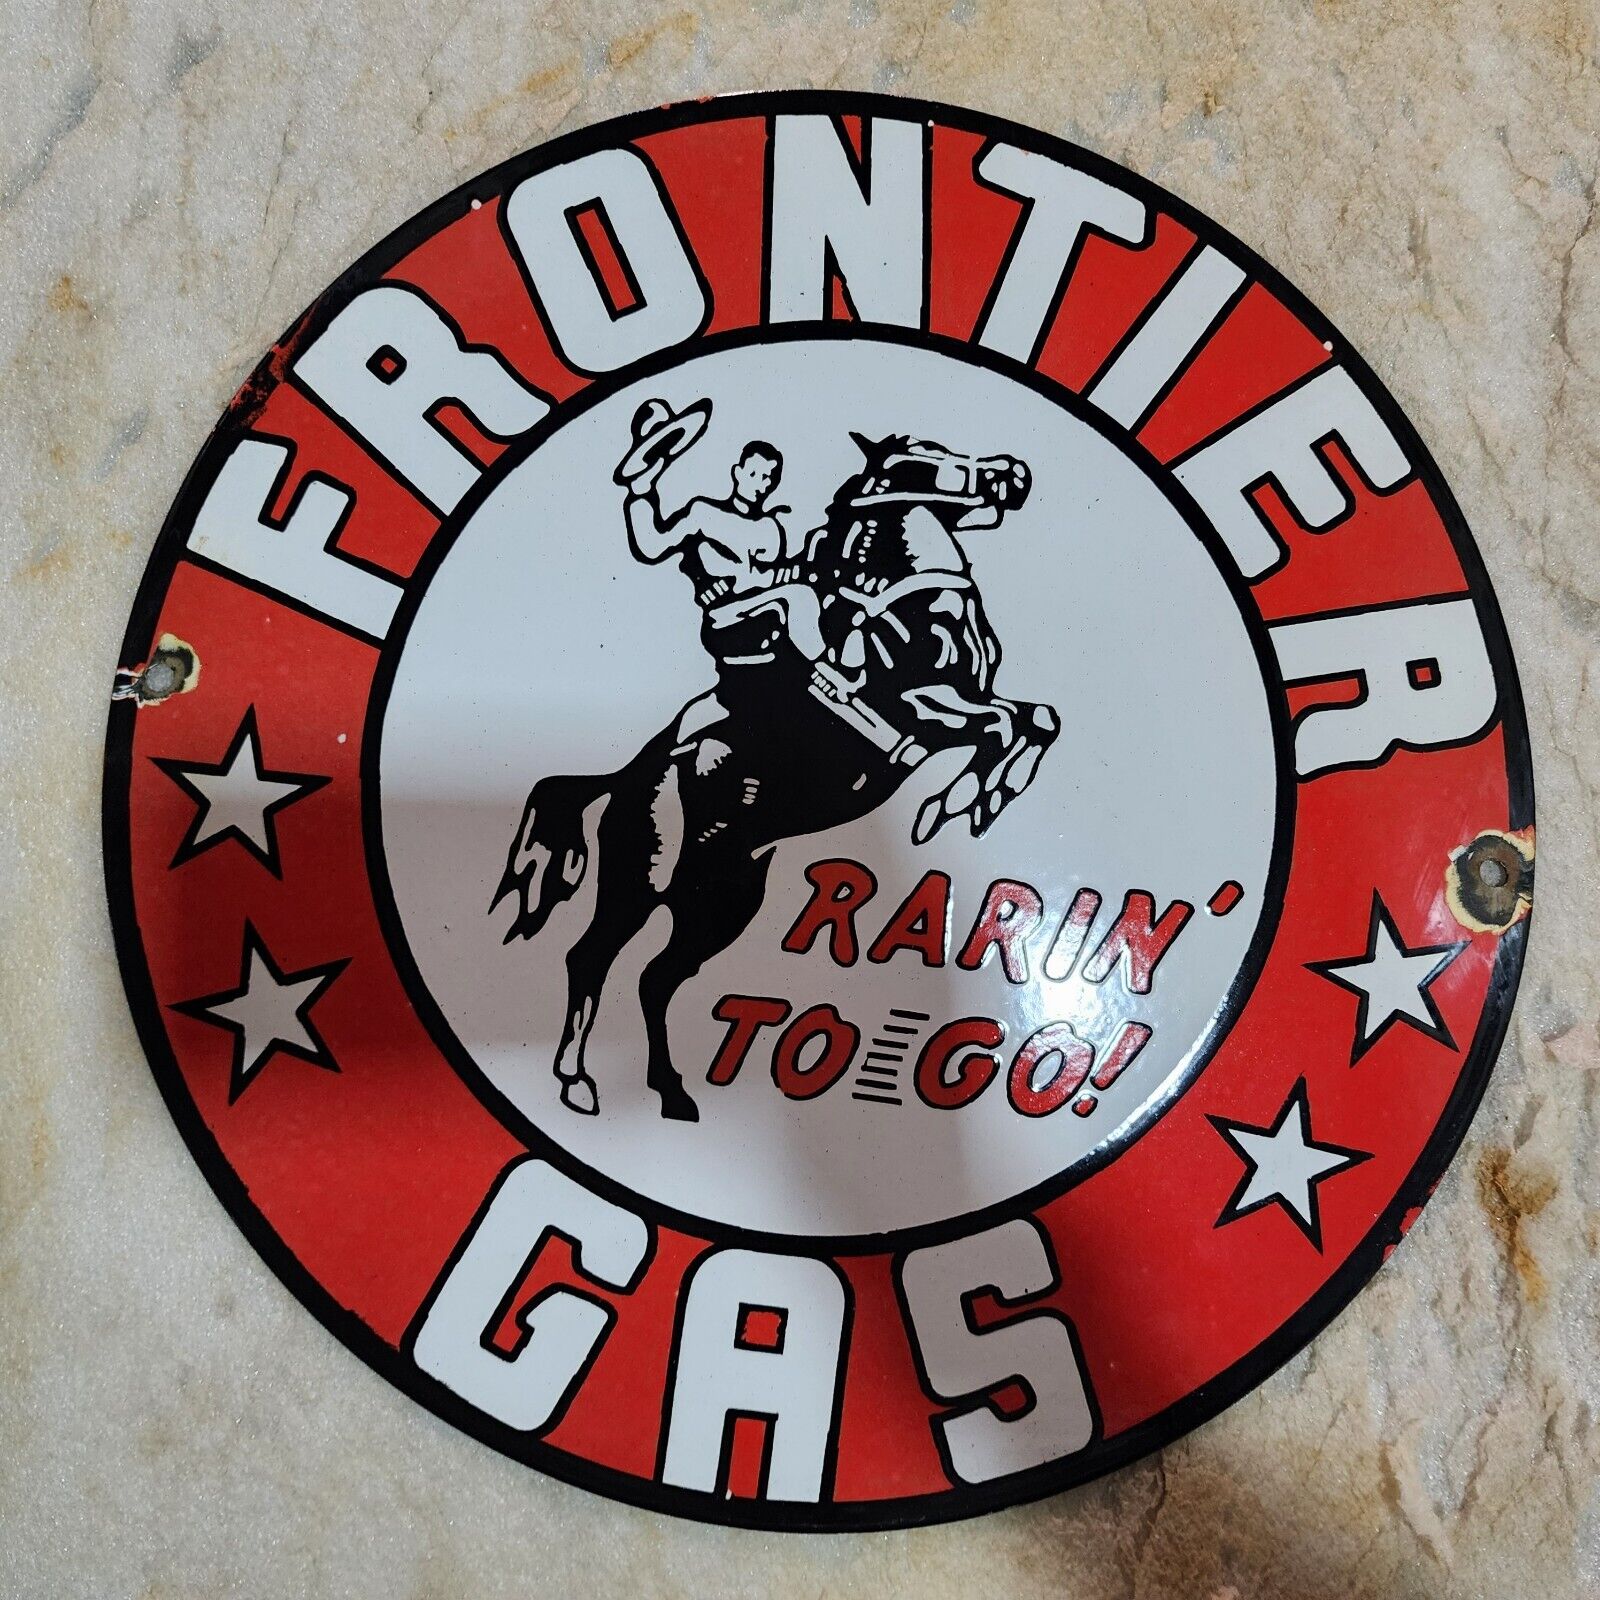 FRONTIER GAS 16 INCHES ROUND ENAMEL SIGN